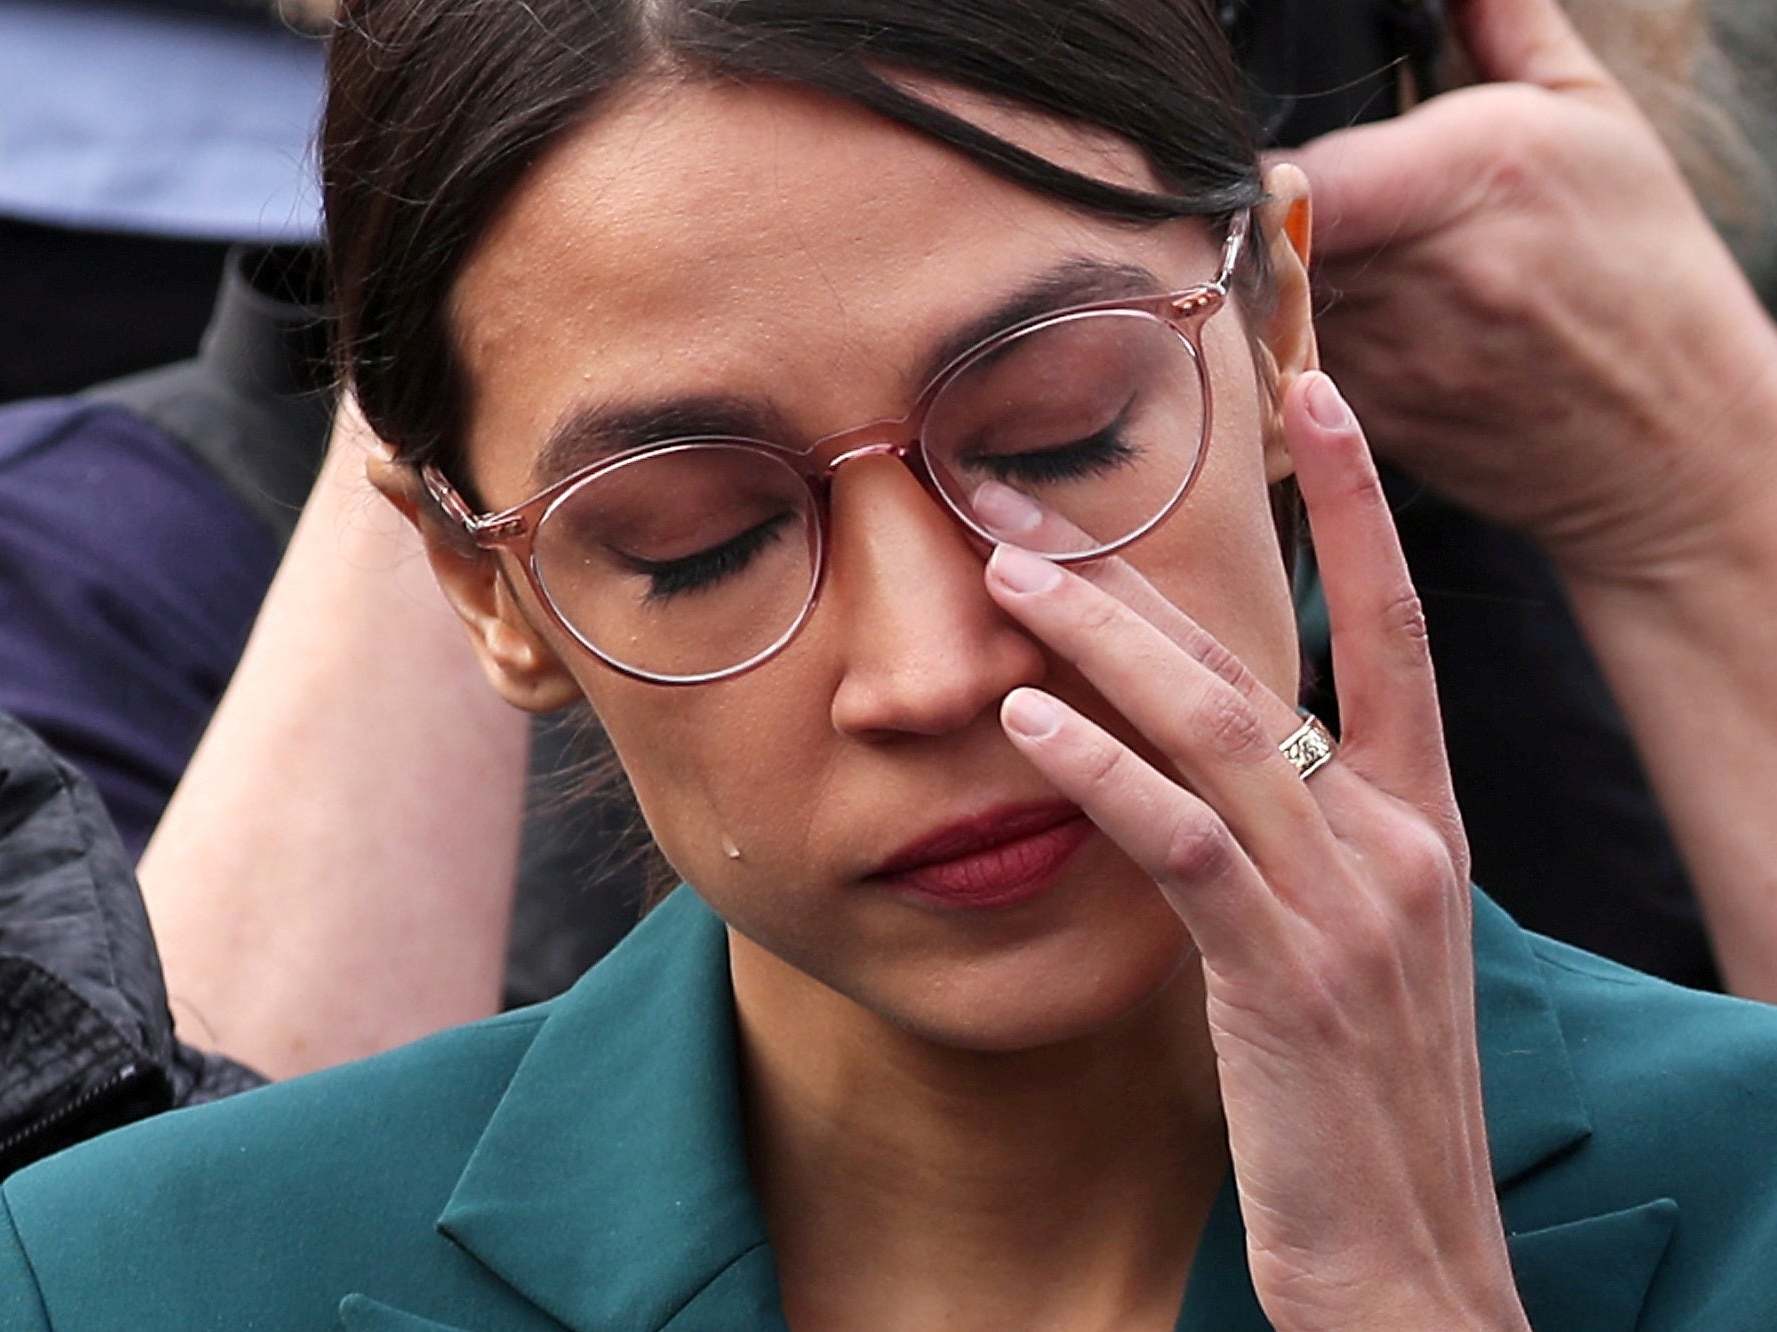 'The rule ignores the reality of American life': AOC attacks Trump administration's food stamp cuts